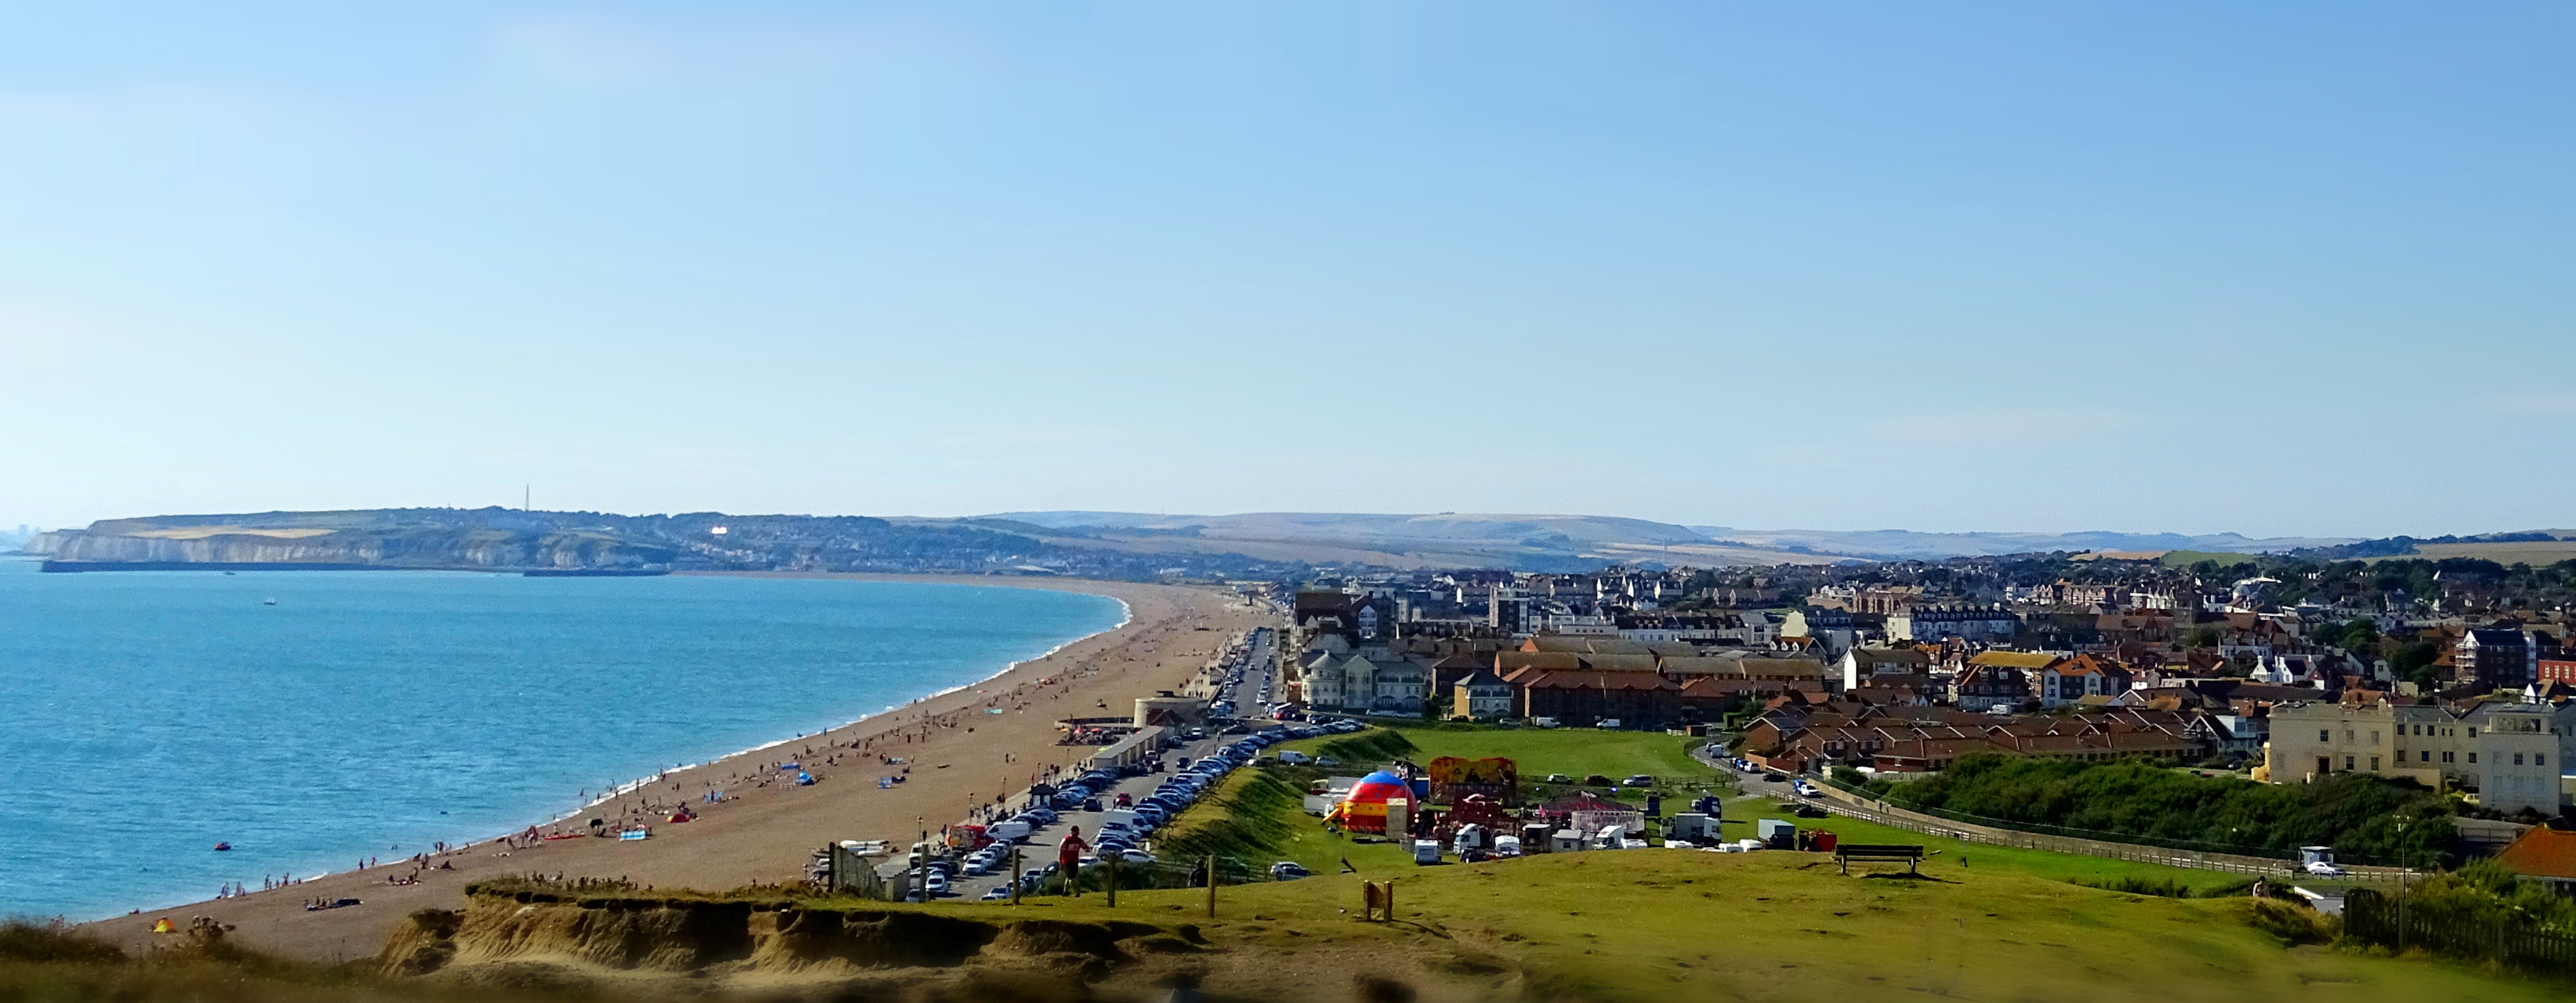 Seaford Bay and Martello Fields.